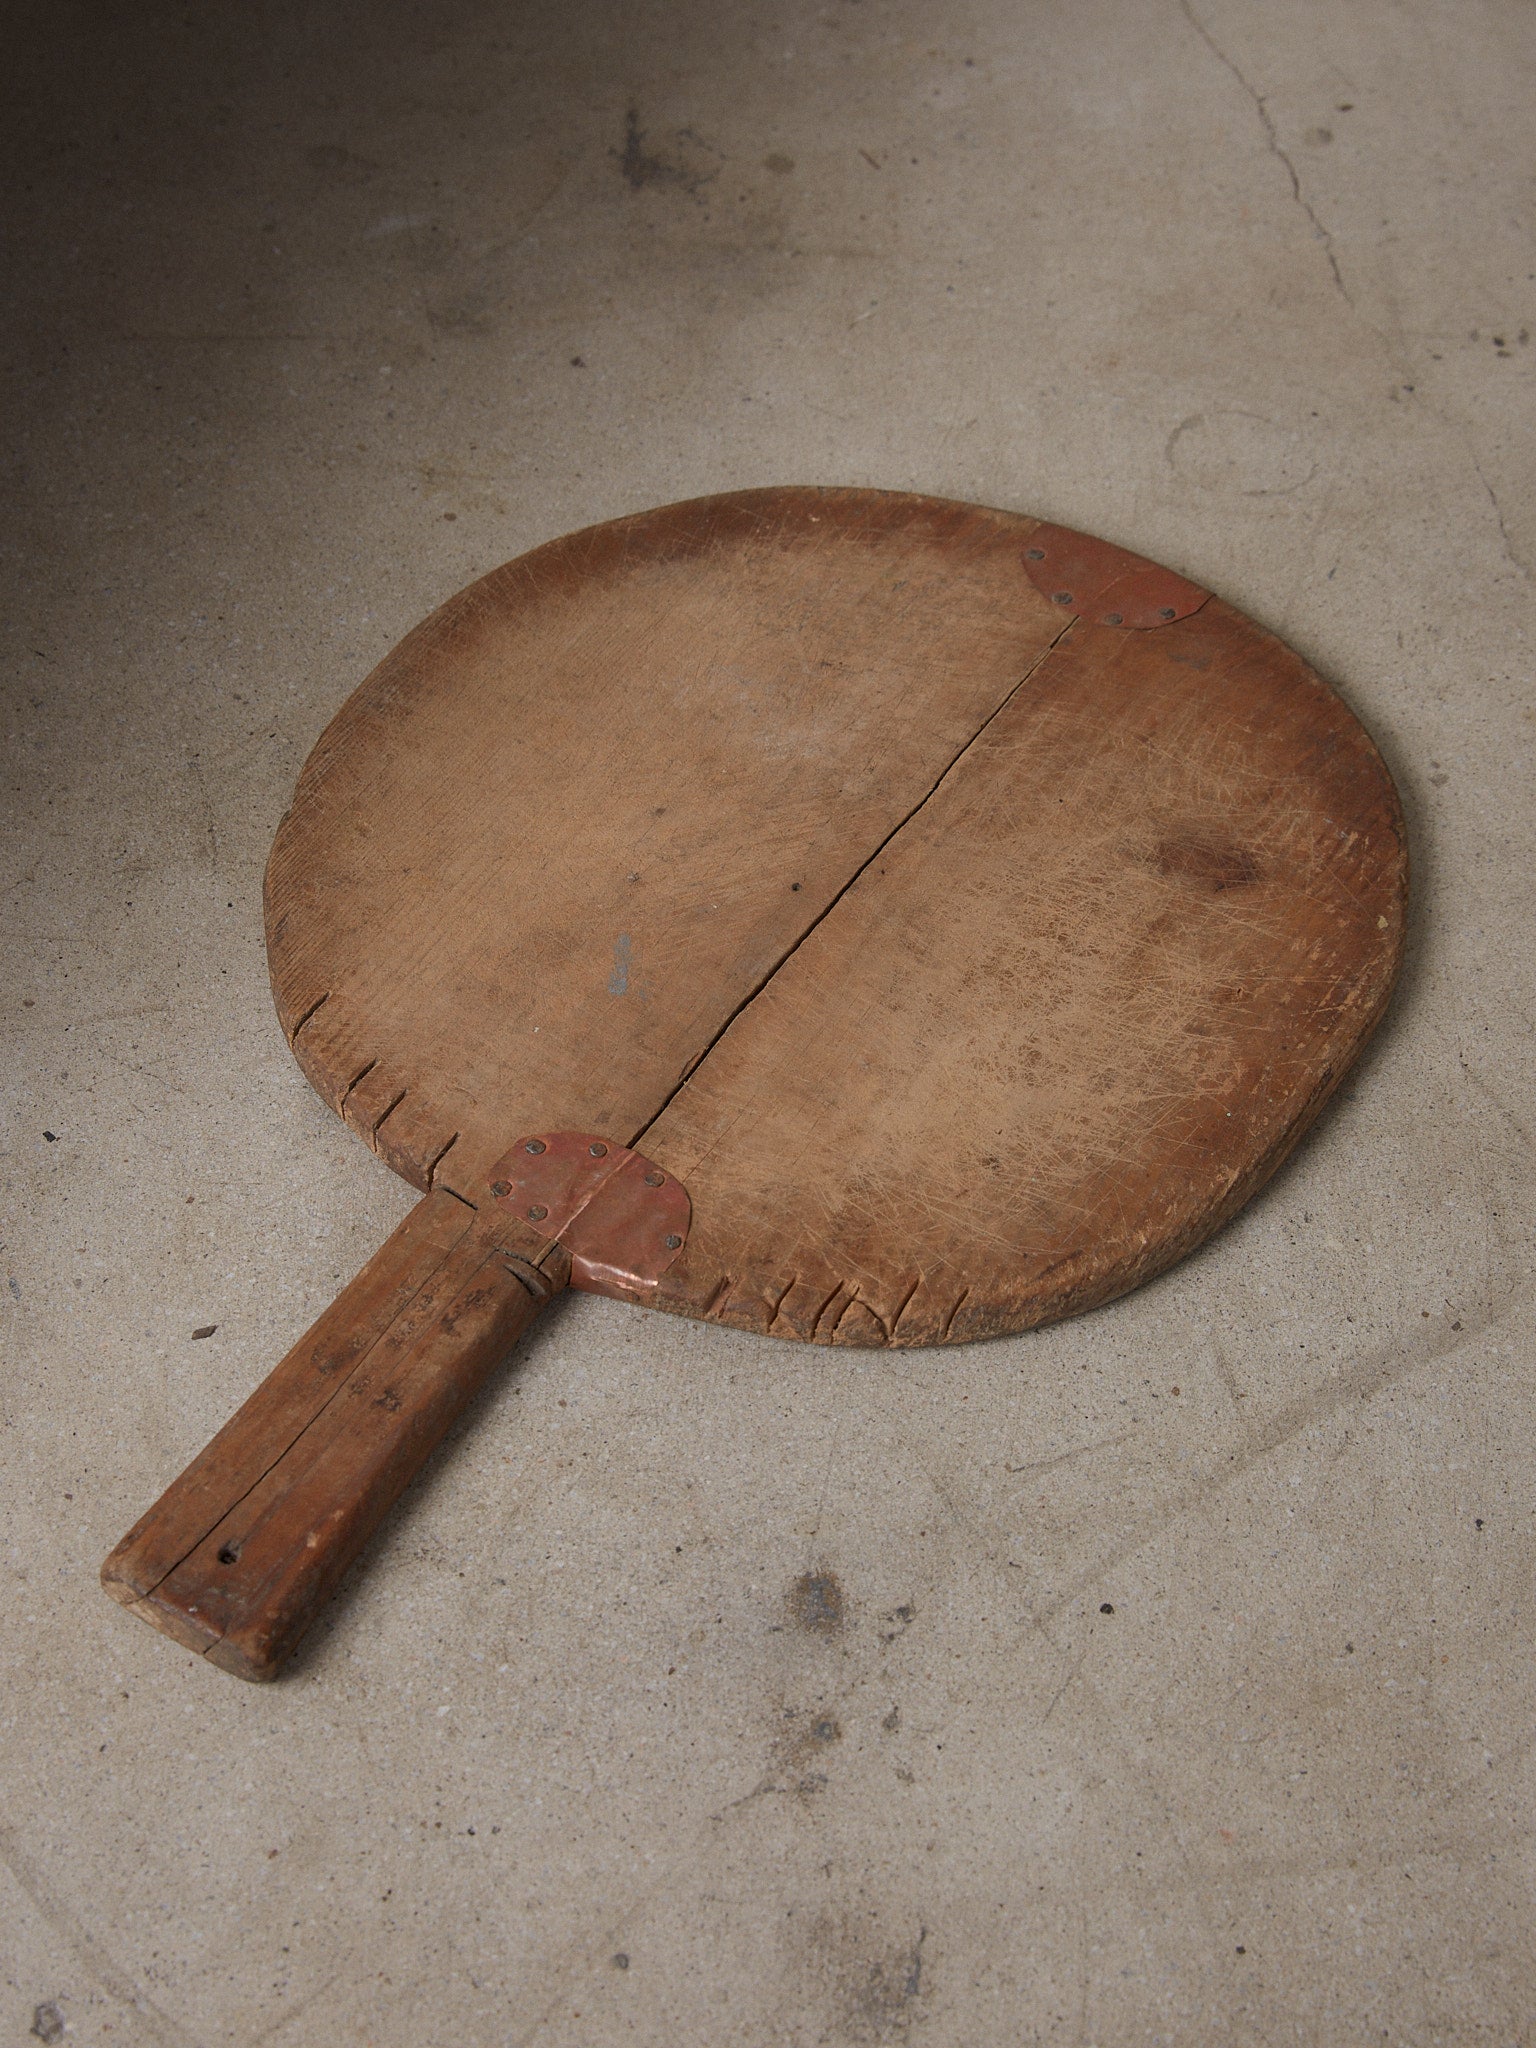 Aix Cutting Board with Repair. Rare find. Small, round handled vintage bread board in aged wood with beautiful copper repair and grain details showing the marks of history and use. 